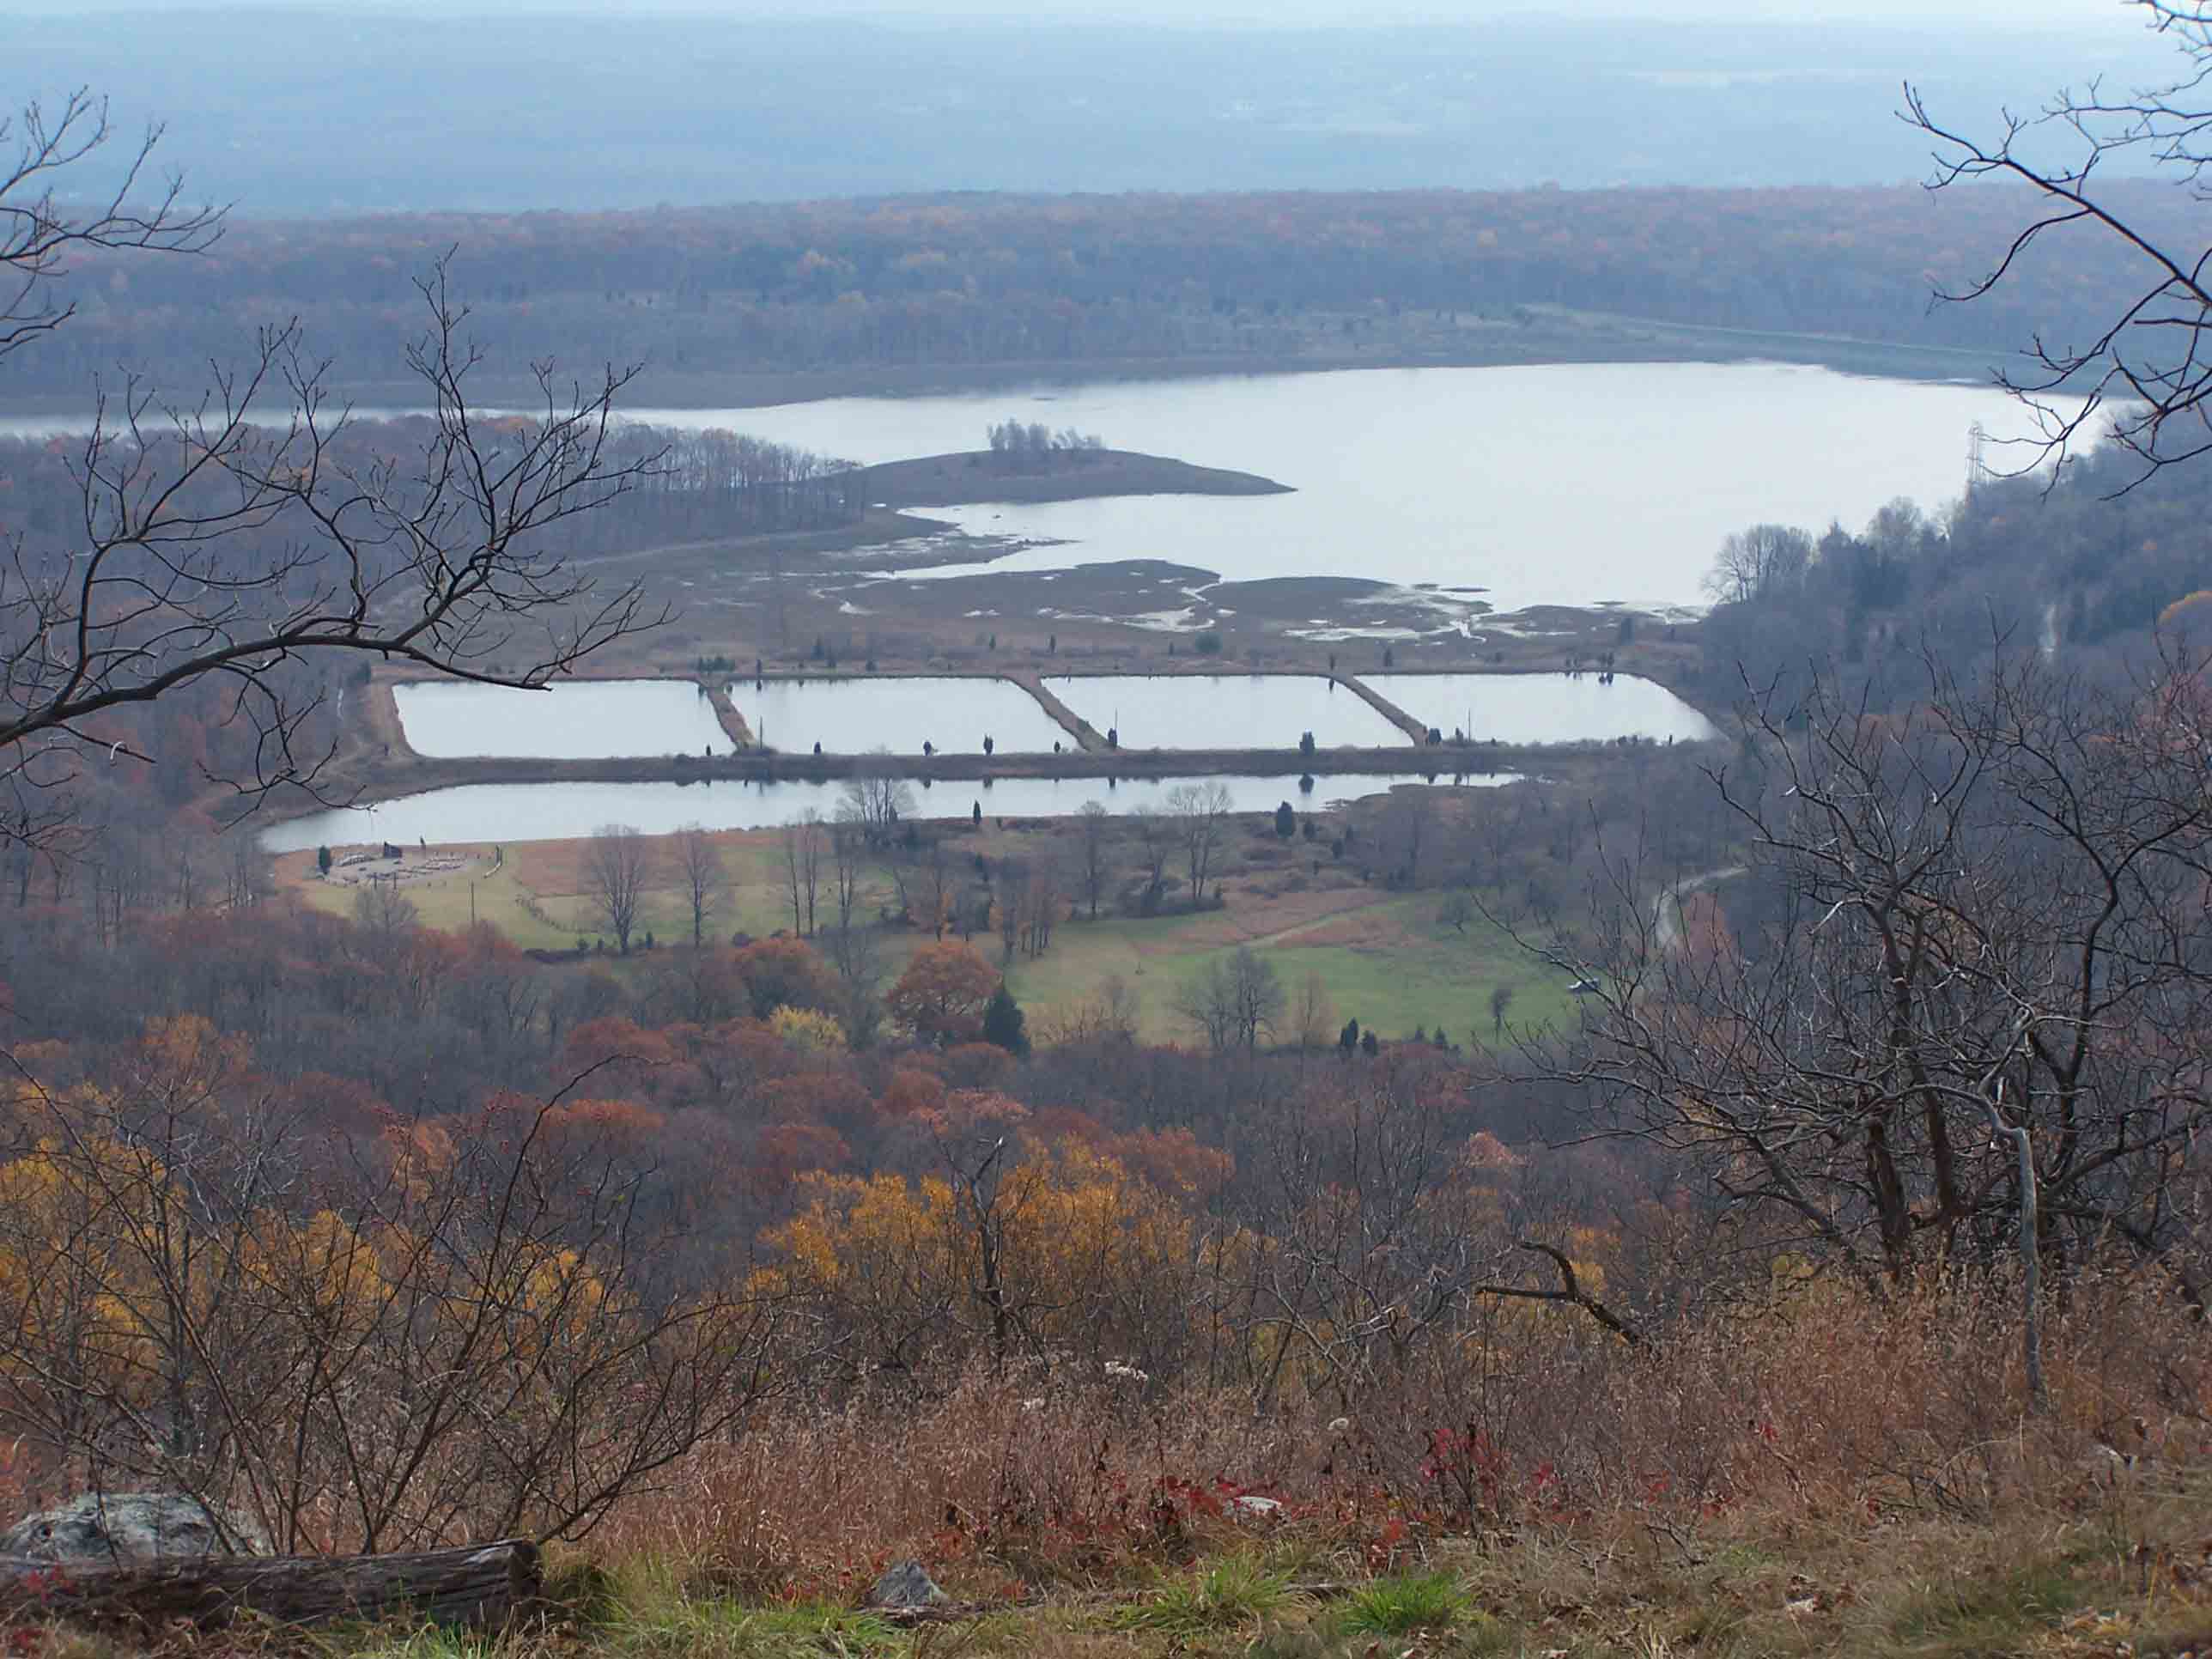 View of Yards Creek Reservoir. Courtesy at@rohland.org